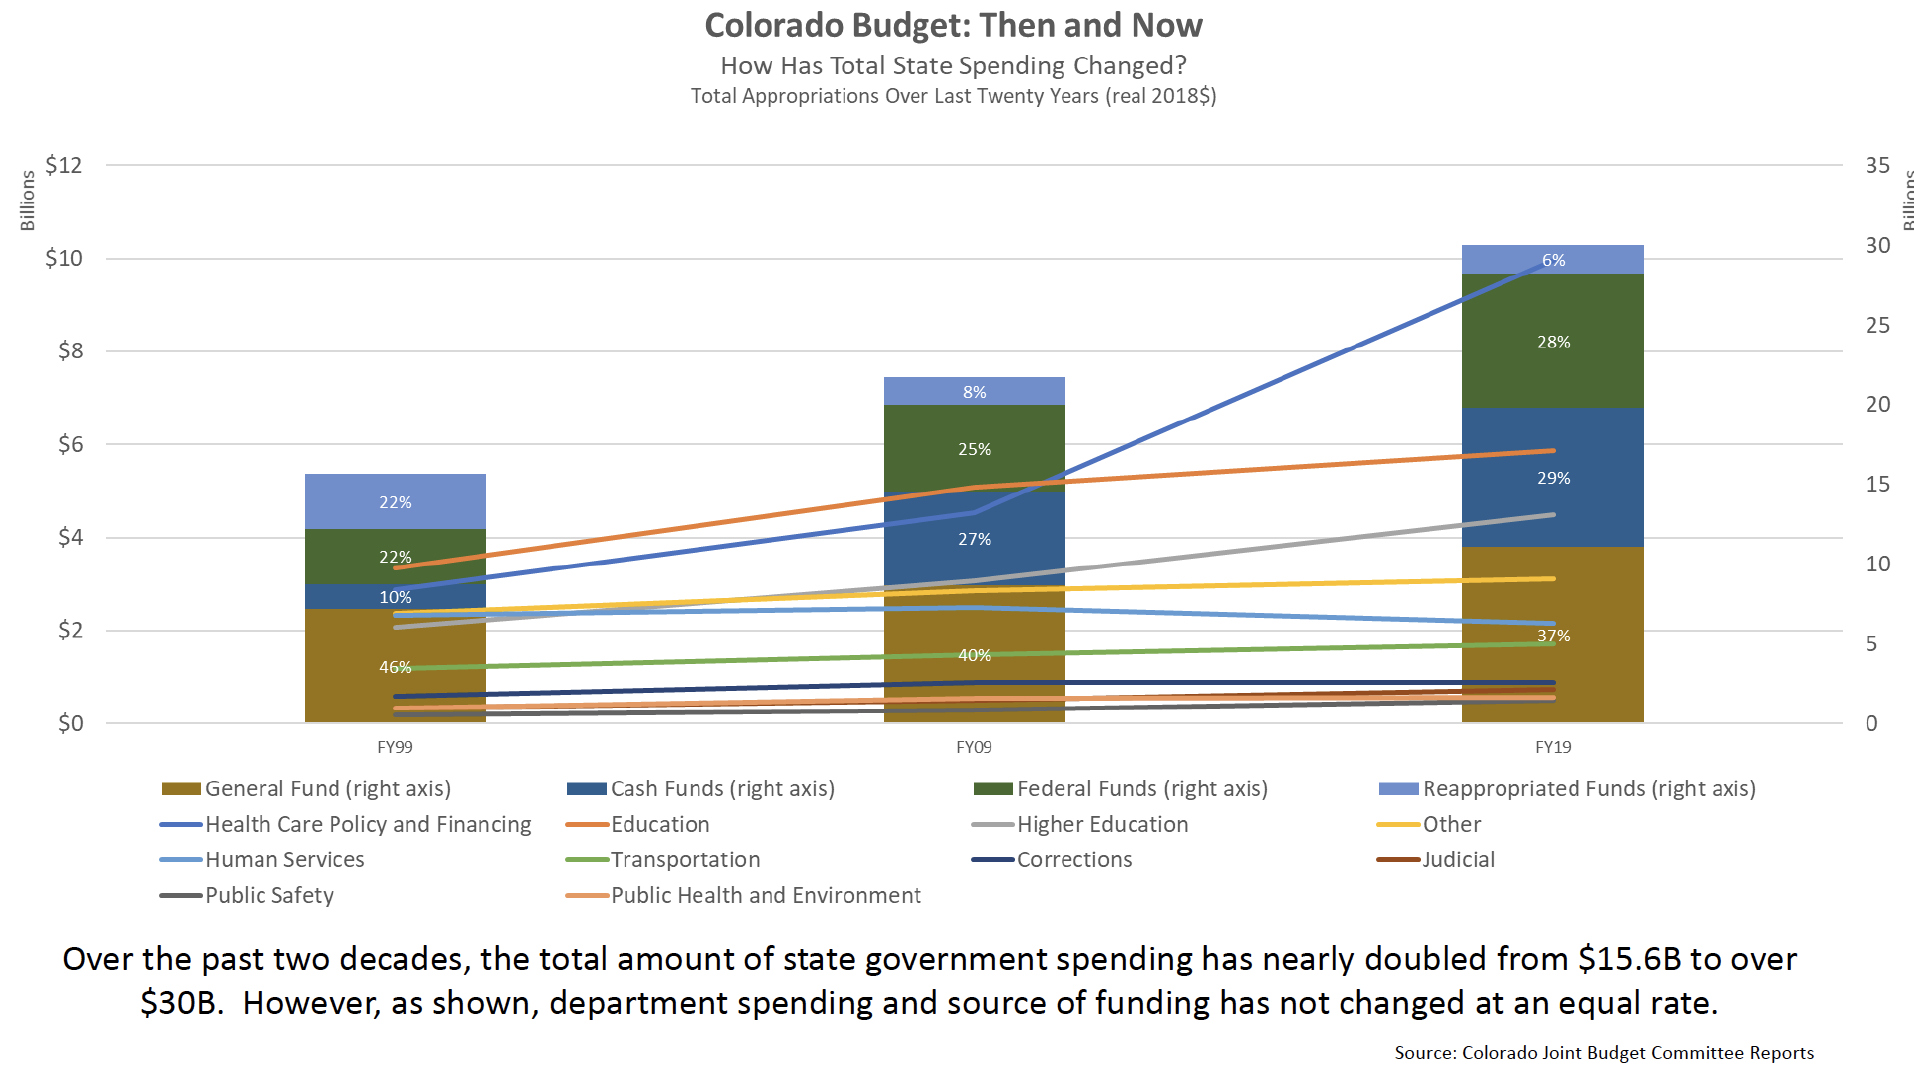 Colorado Budget: Then and Now